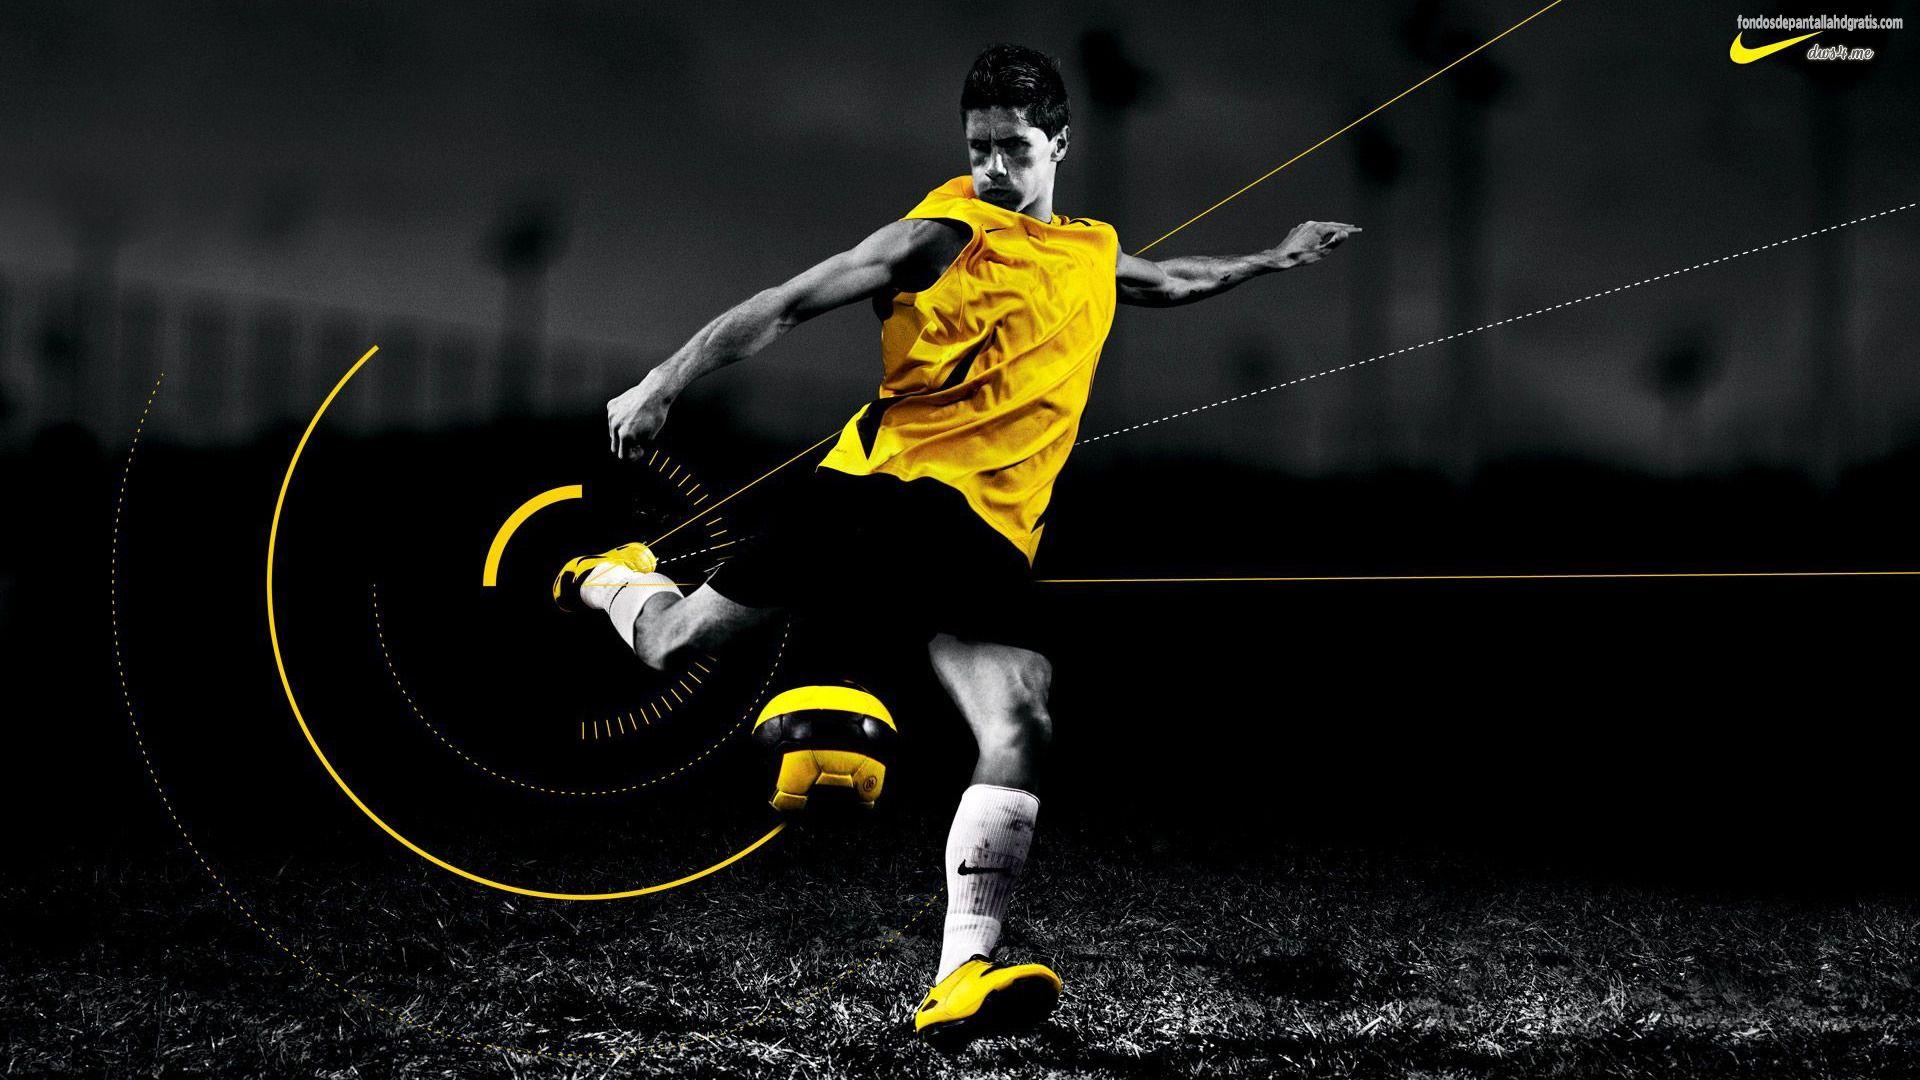 3D Sports Wallpapers